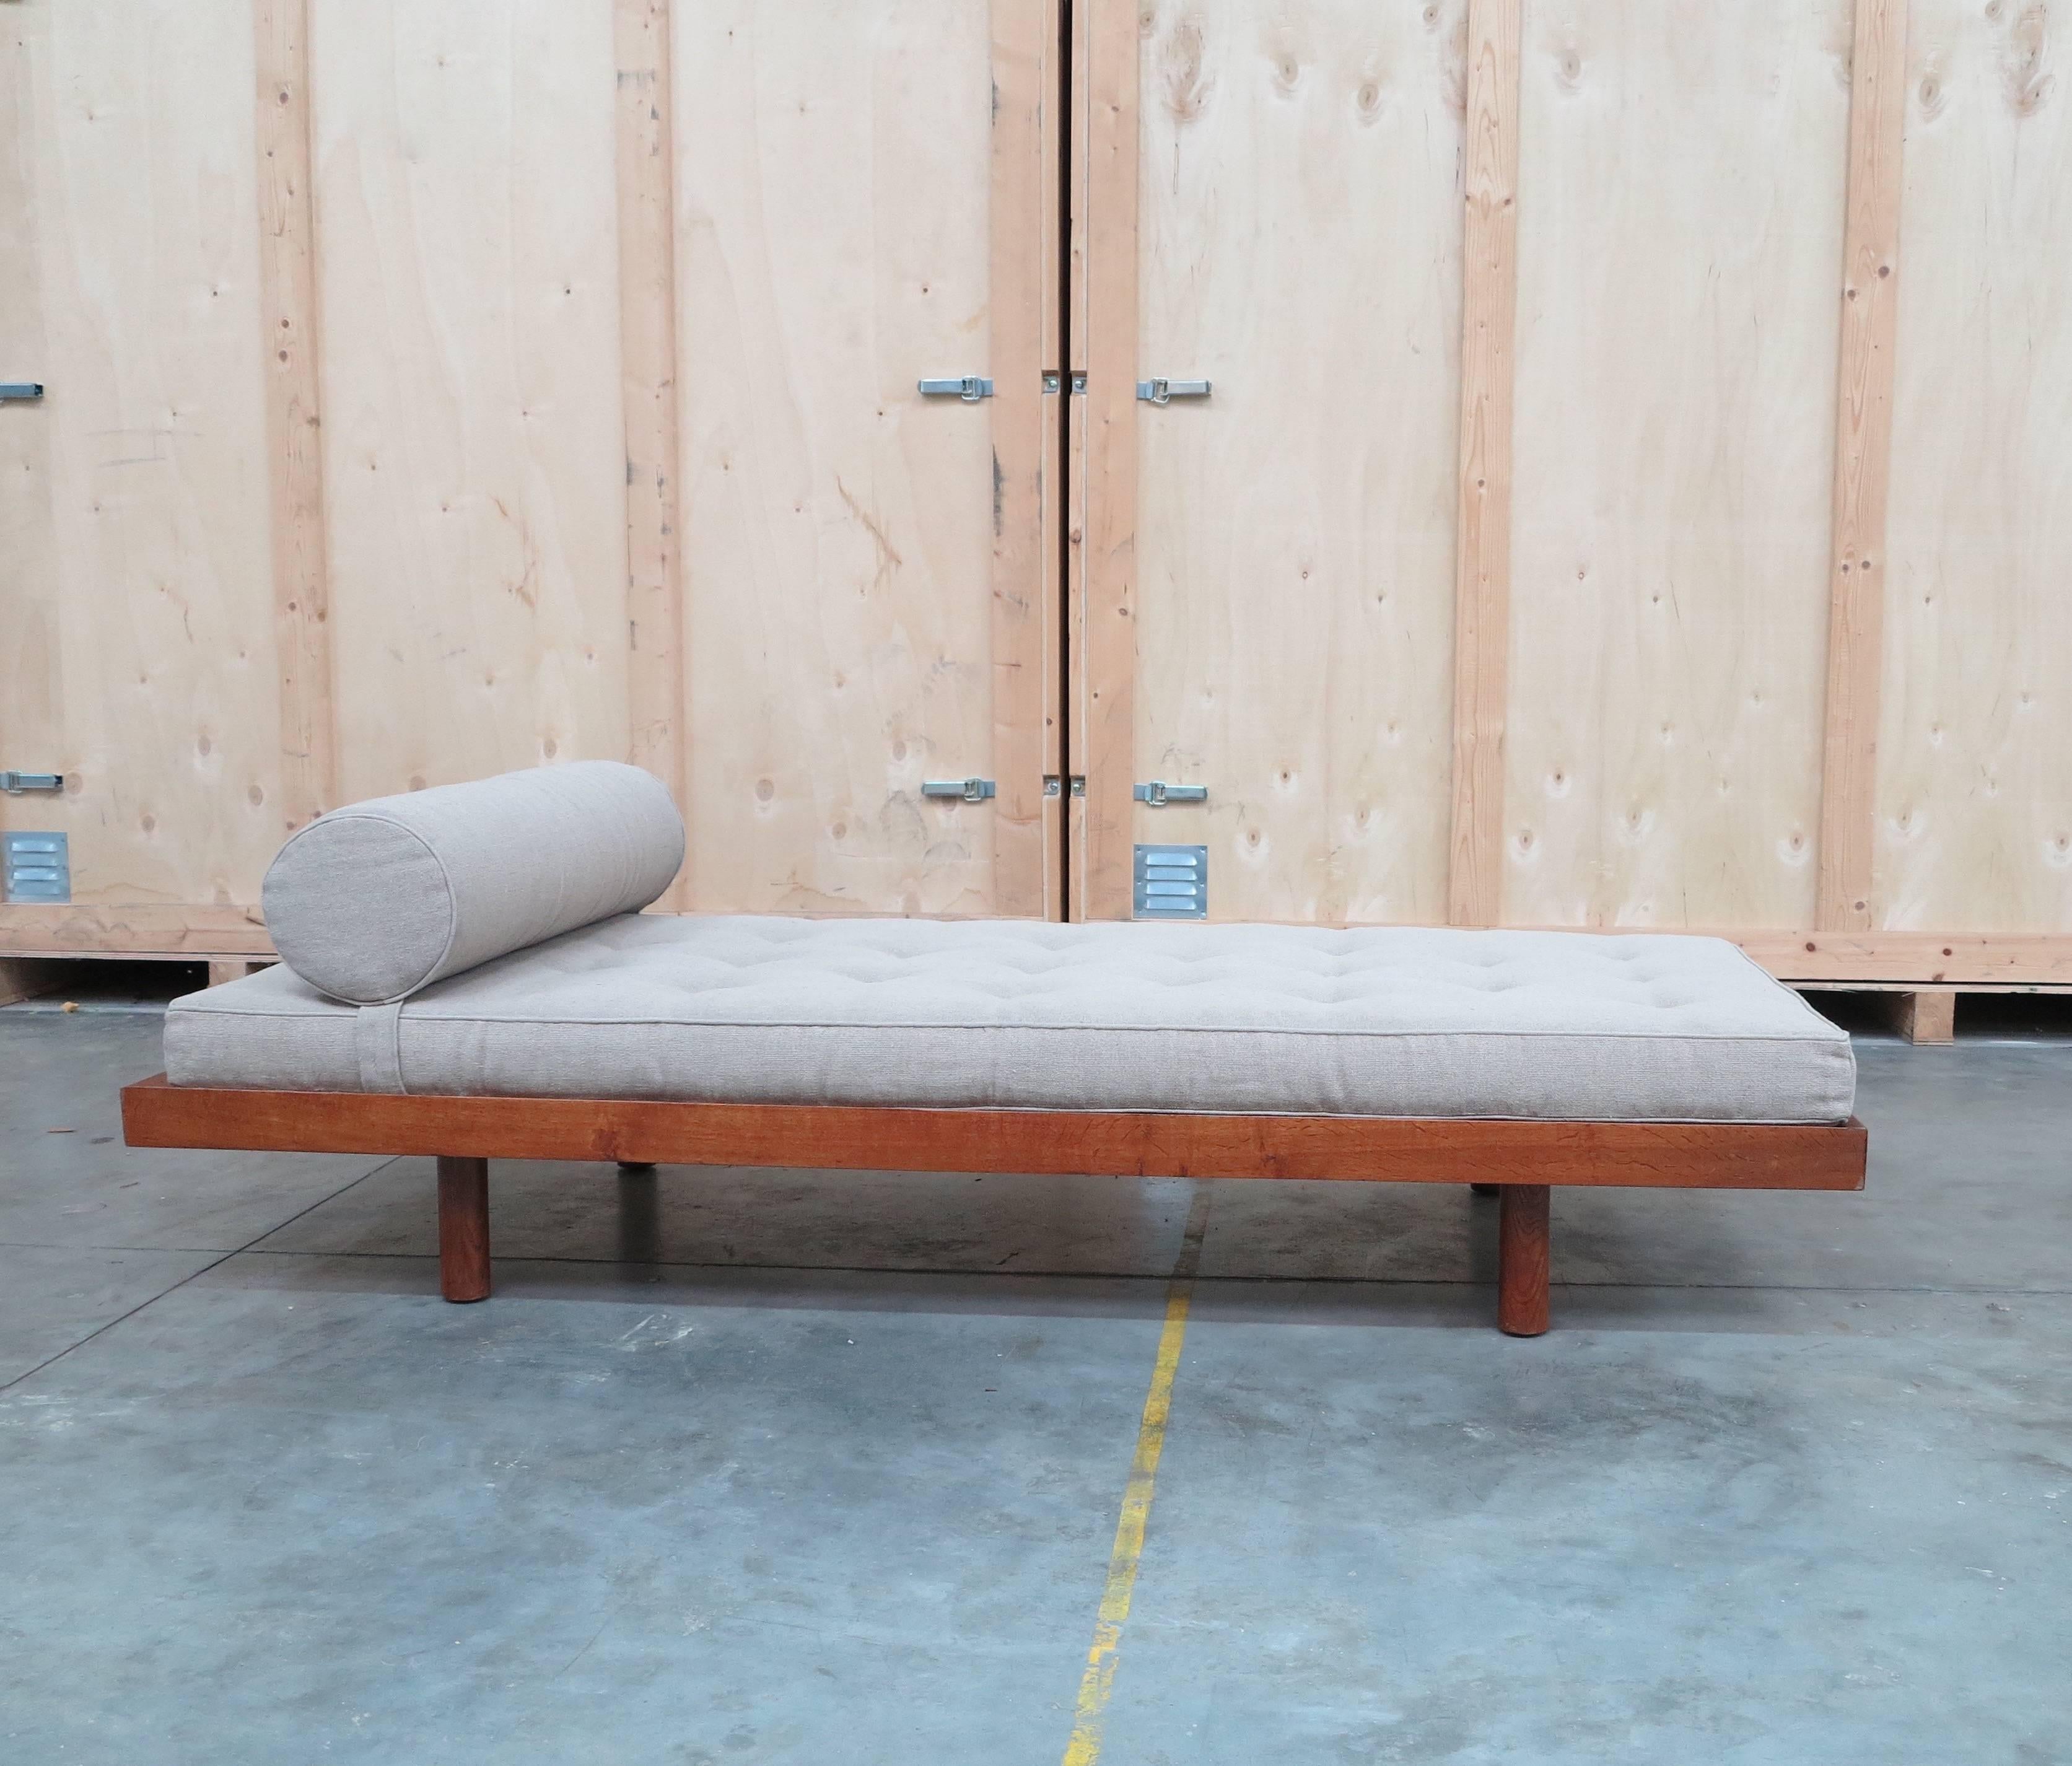 Charlotte Perriand (1903-1999).

Daybed,
1959.

Oak structure, natural canvas mattress and cushion.

Measures: H 11 x L 114.1/4 x W. 31.1/2 in.

Special commission for the 